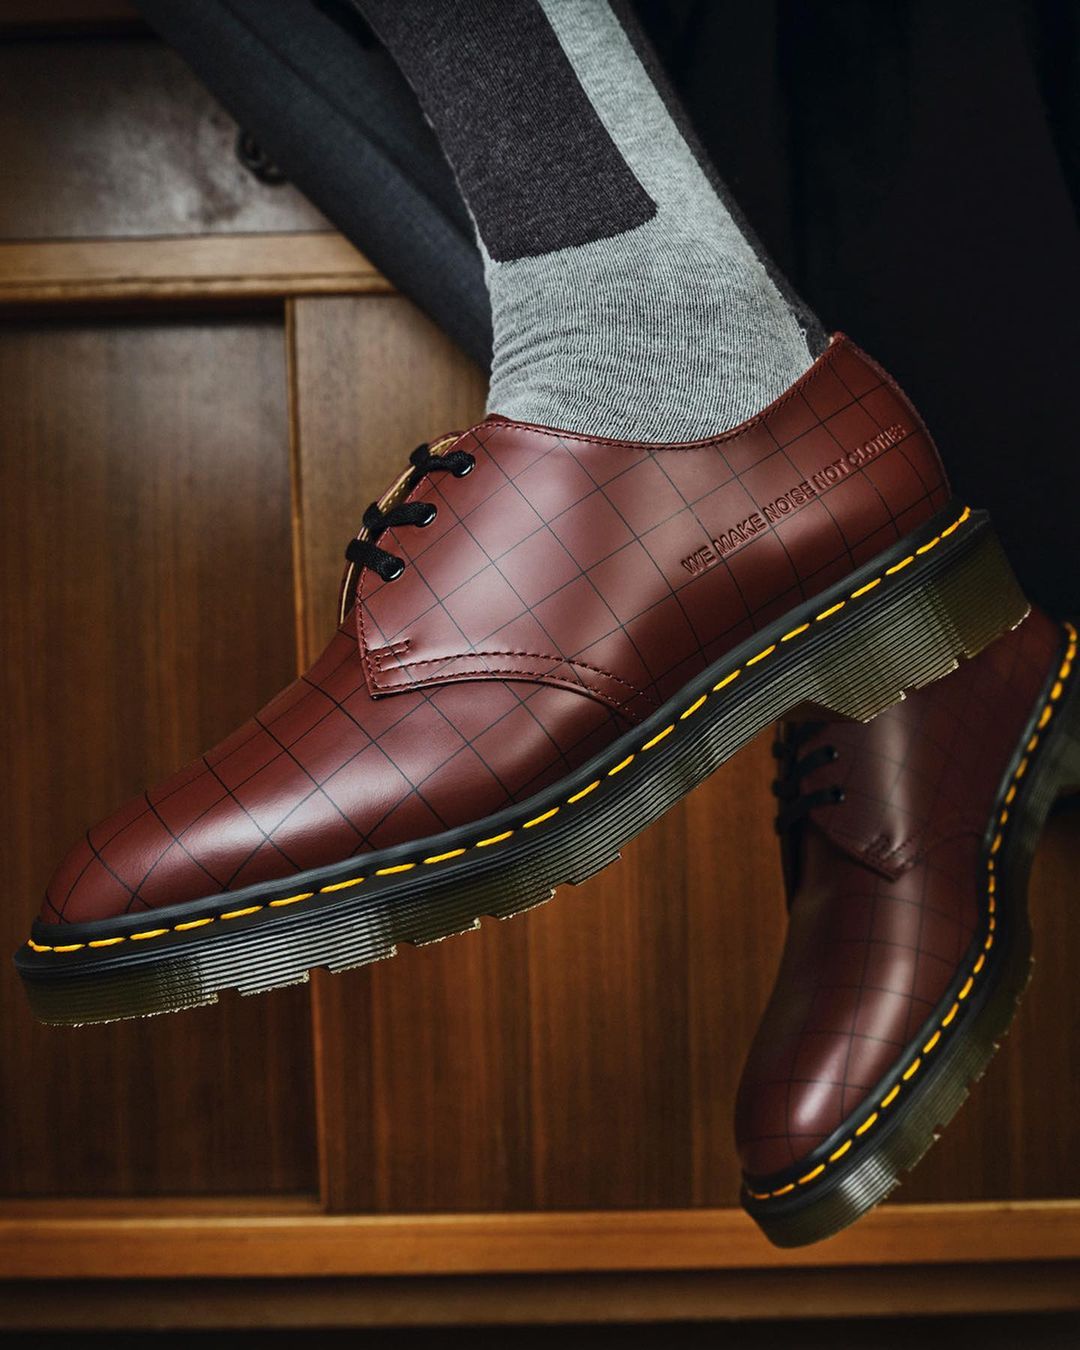 Dr. Martens UNDERCOVER 1461 チェリー 3ホール